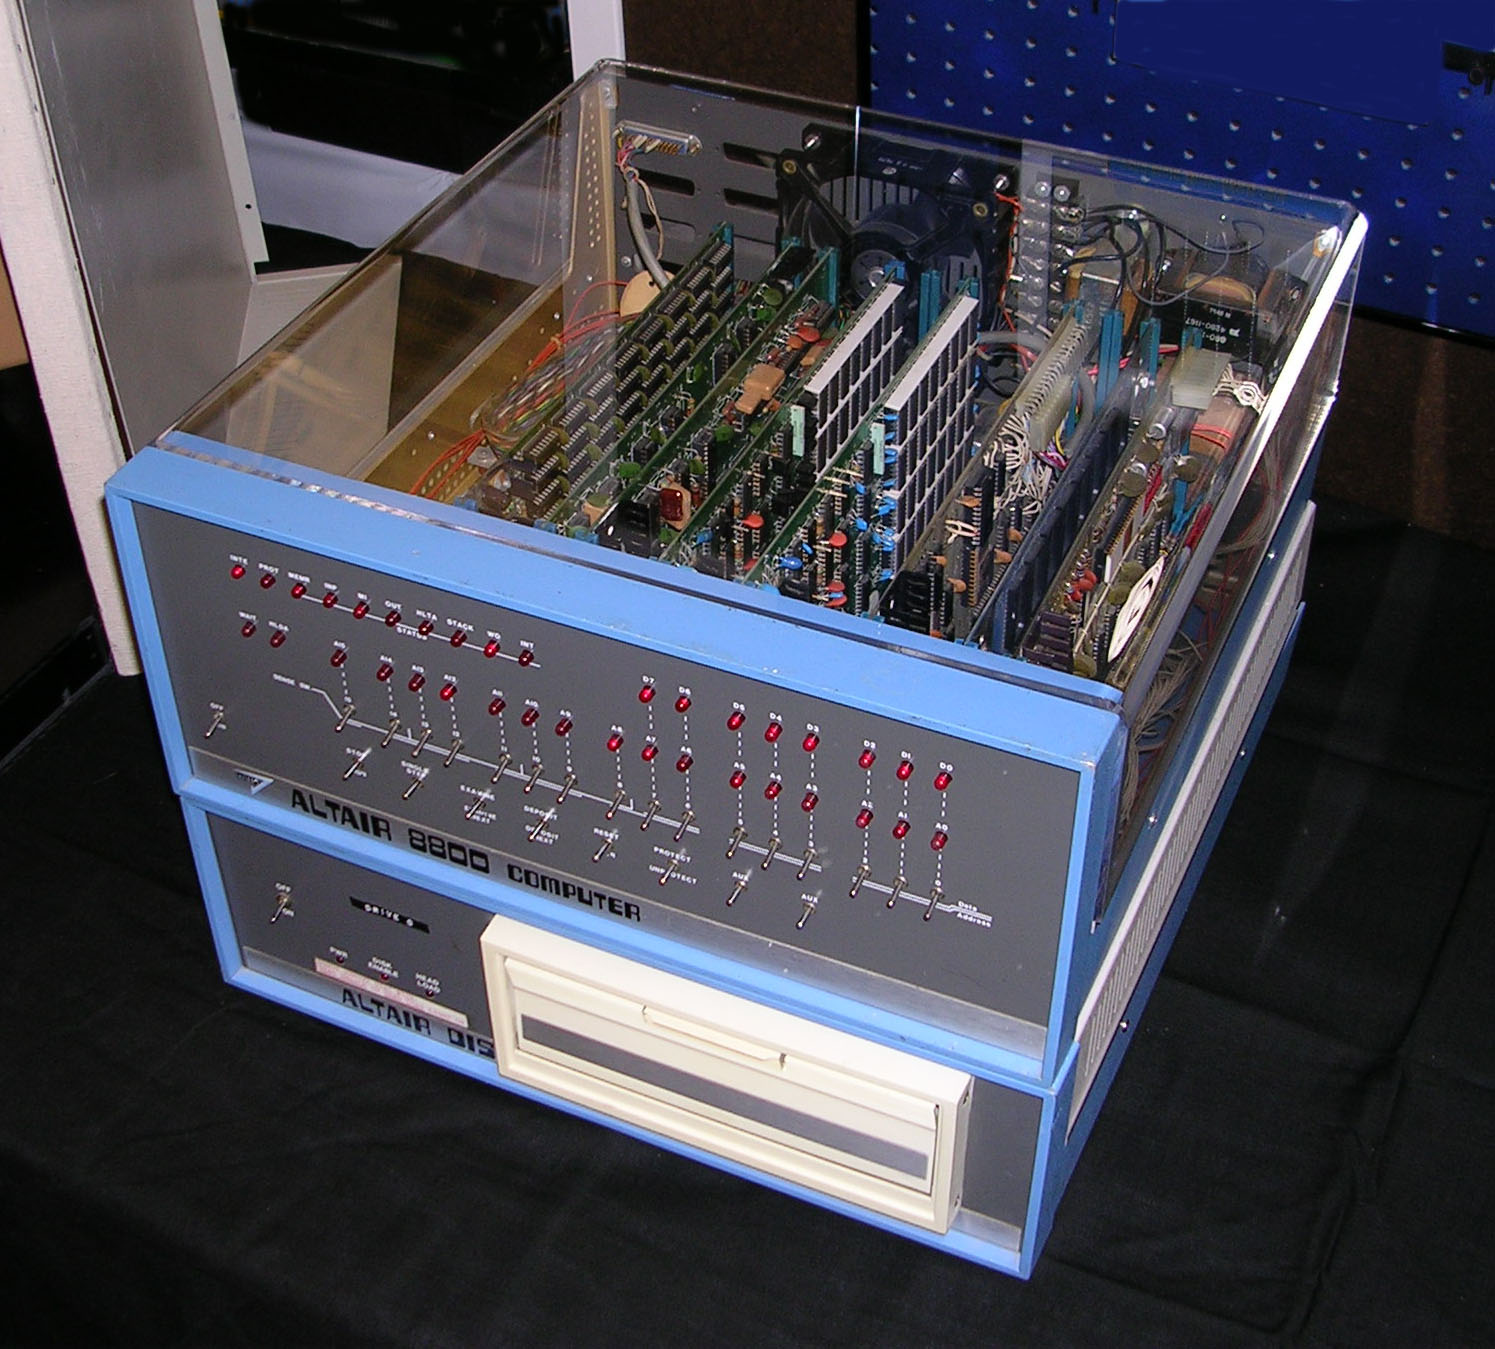 Altair 8800 Computer with 8 inch floppy disk system